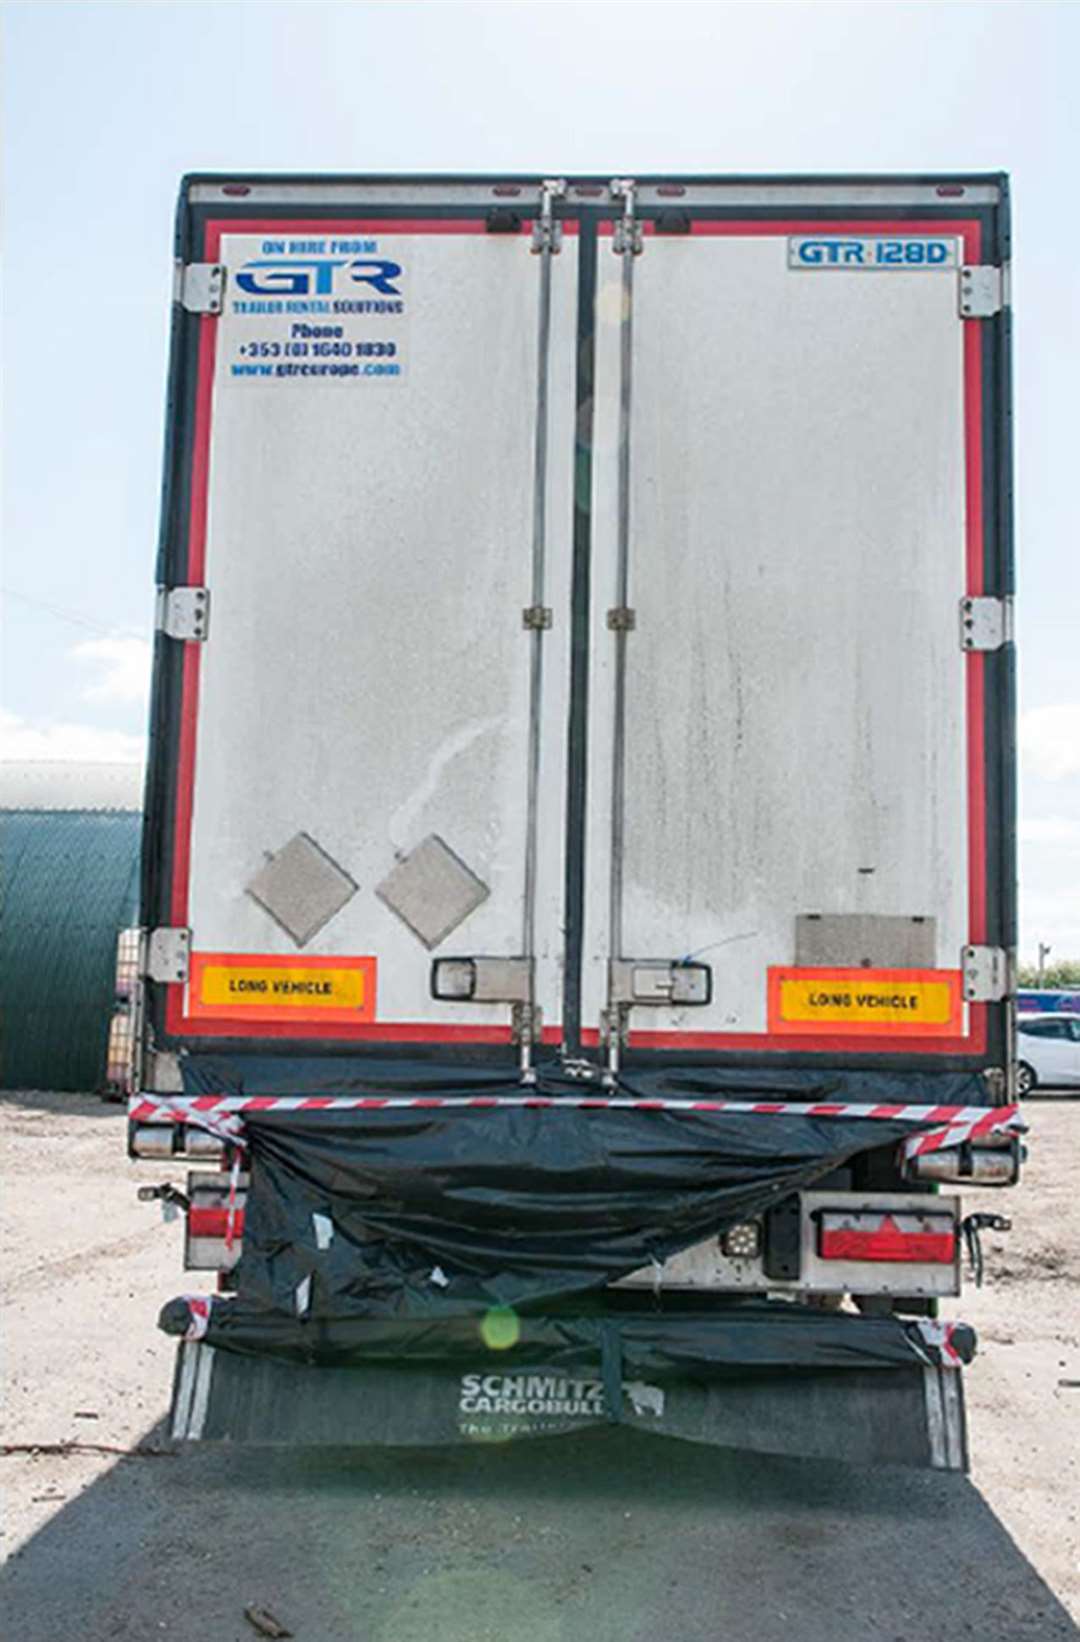 Photo of the doors on the trailer, which was shown at the Old Bailey (Essex Police/PA)